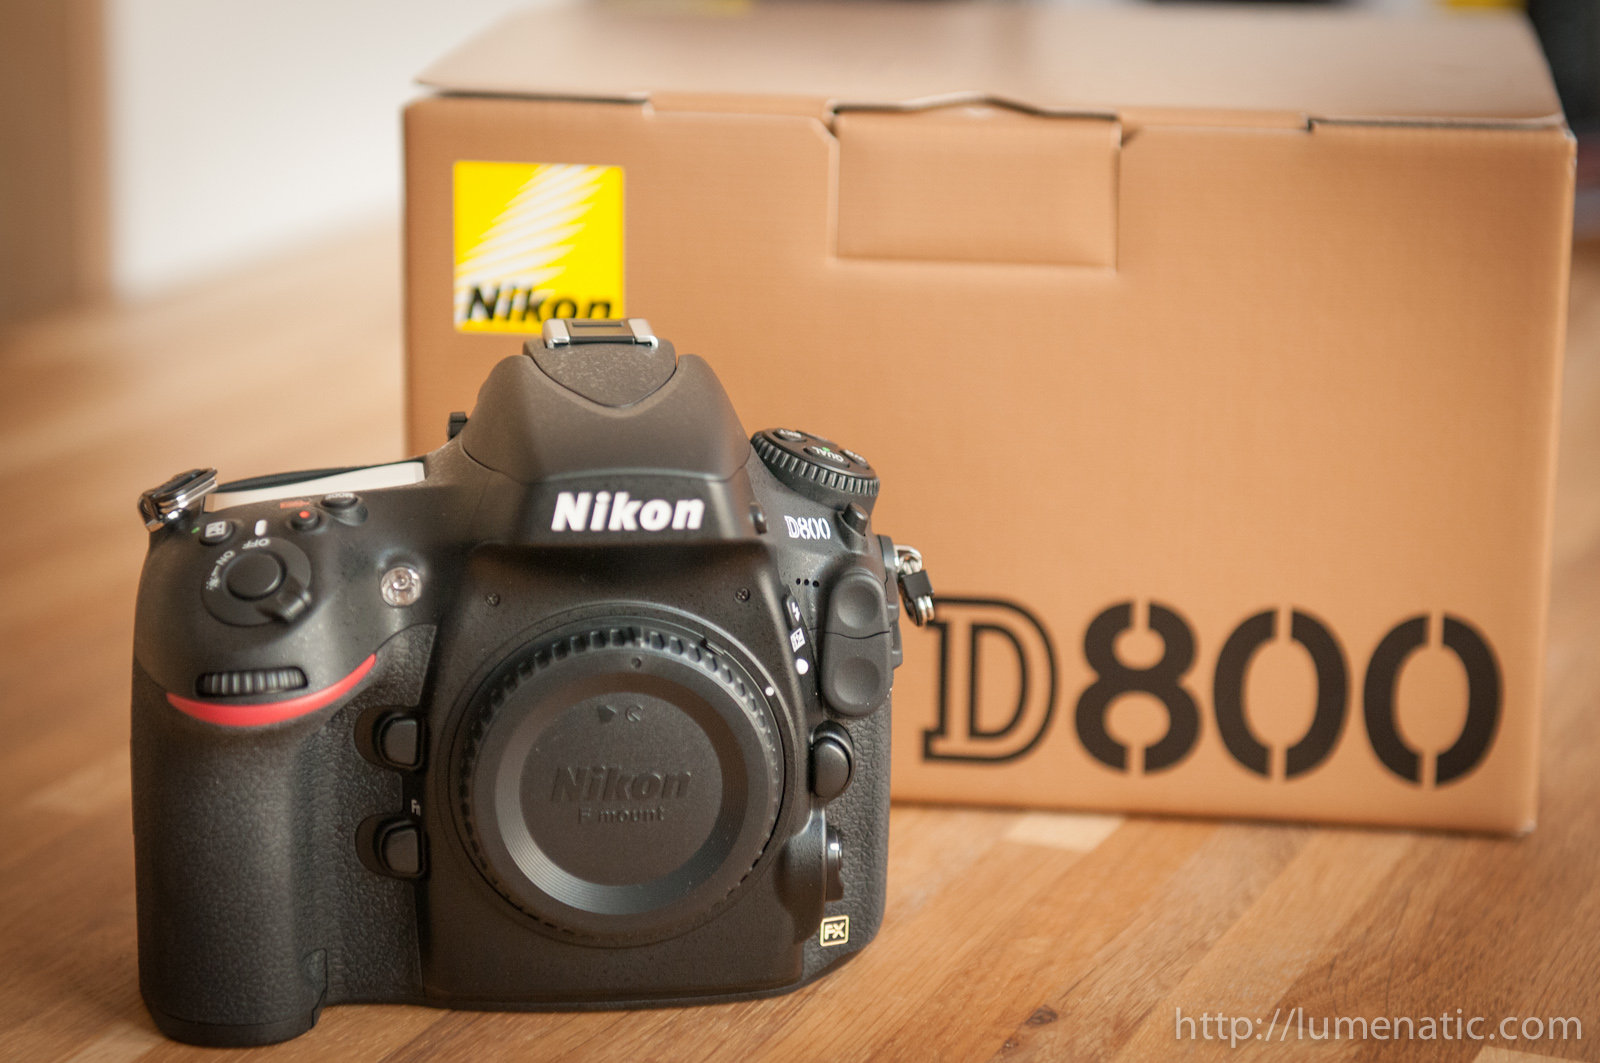 D800 CLS issue feedback from Nikon Germany – it’s a hardware AND software issue (updated)